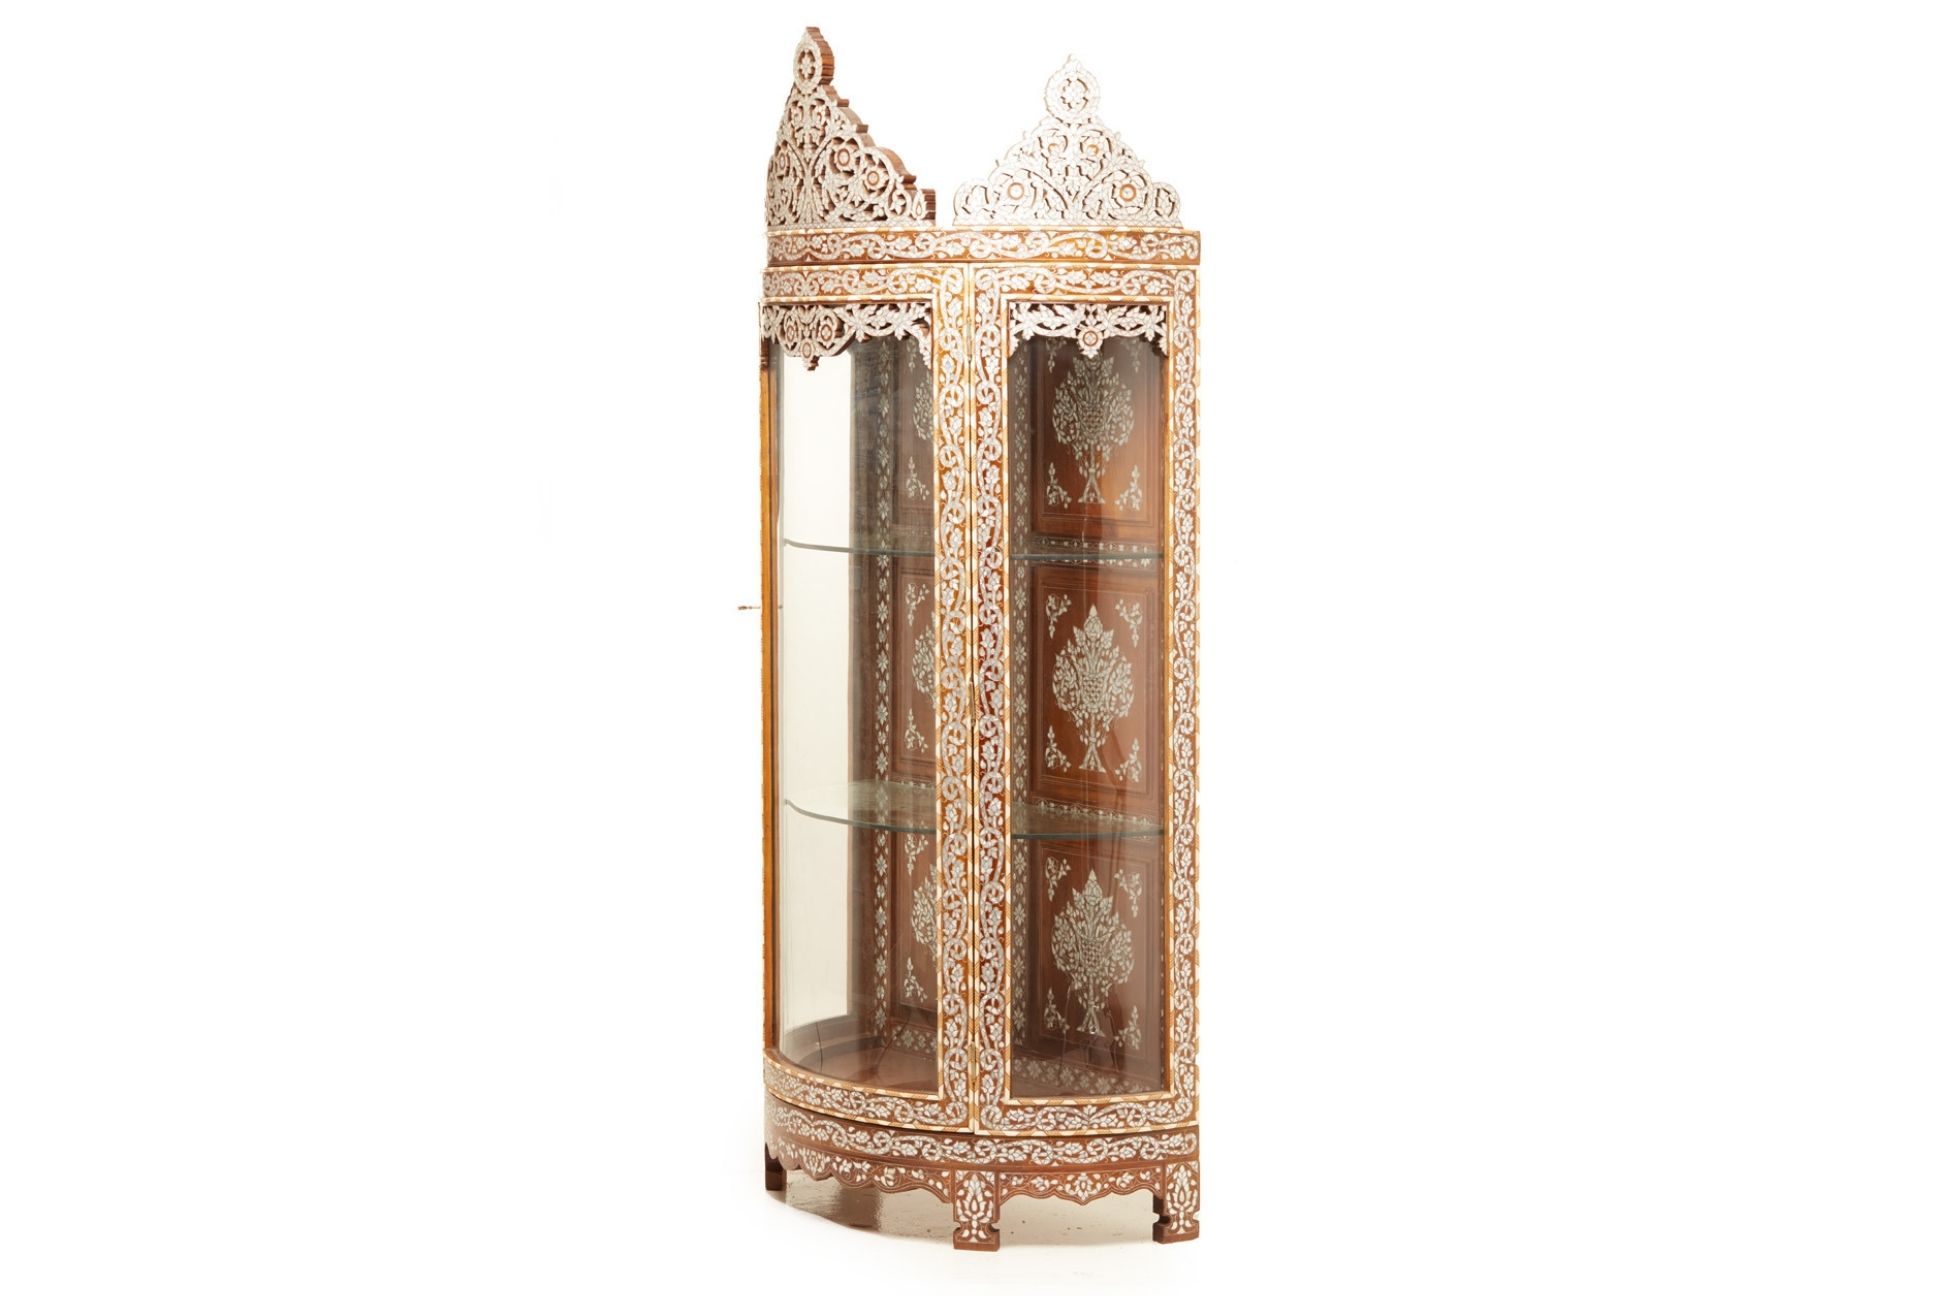 A SYRIAN MOTHER OF PEARL AND BONE INLAID DISPLAY CABINET (1) - Image 2 of 5